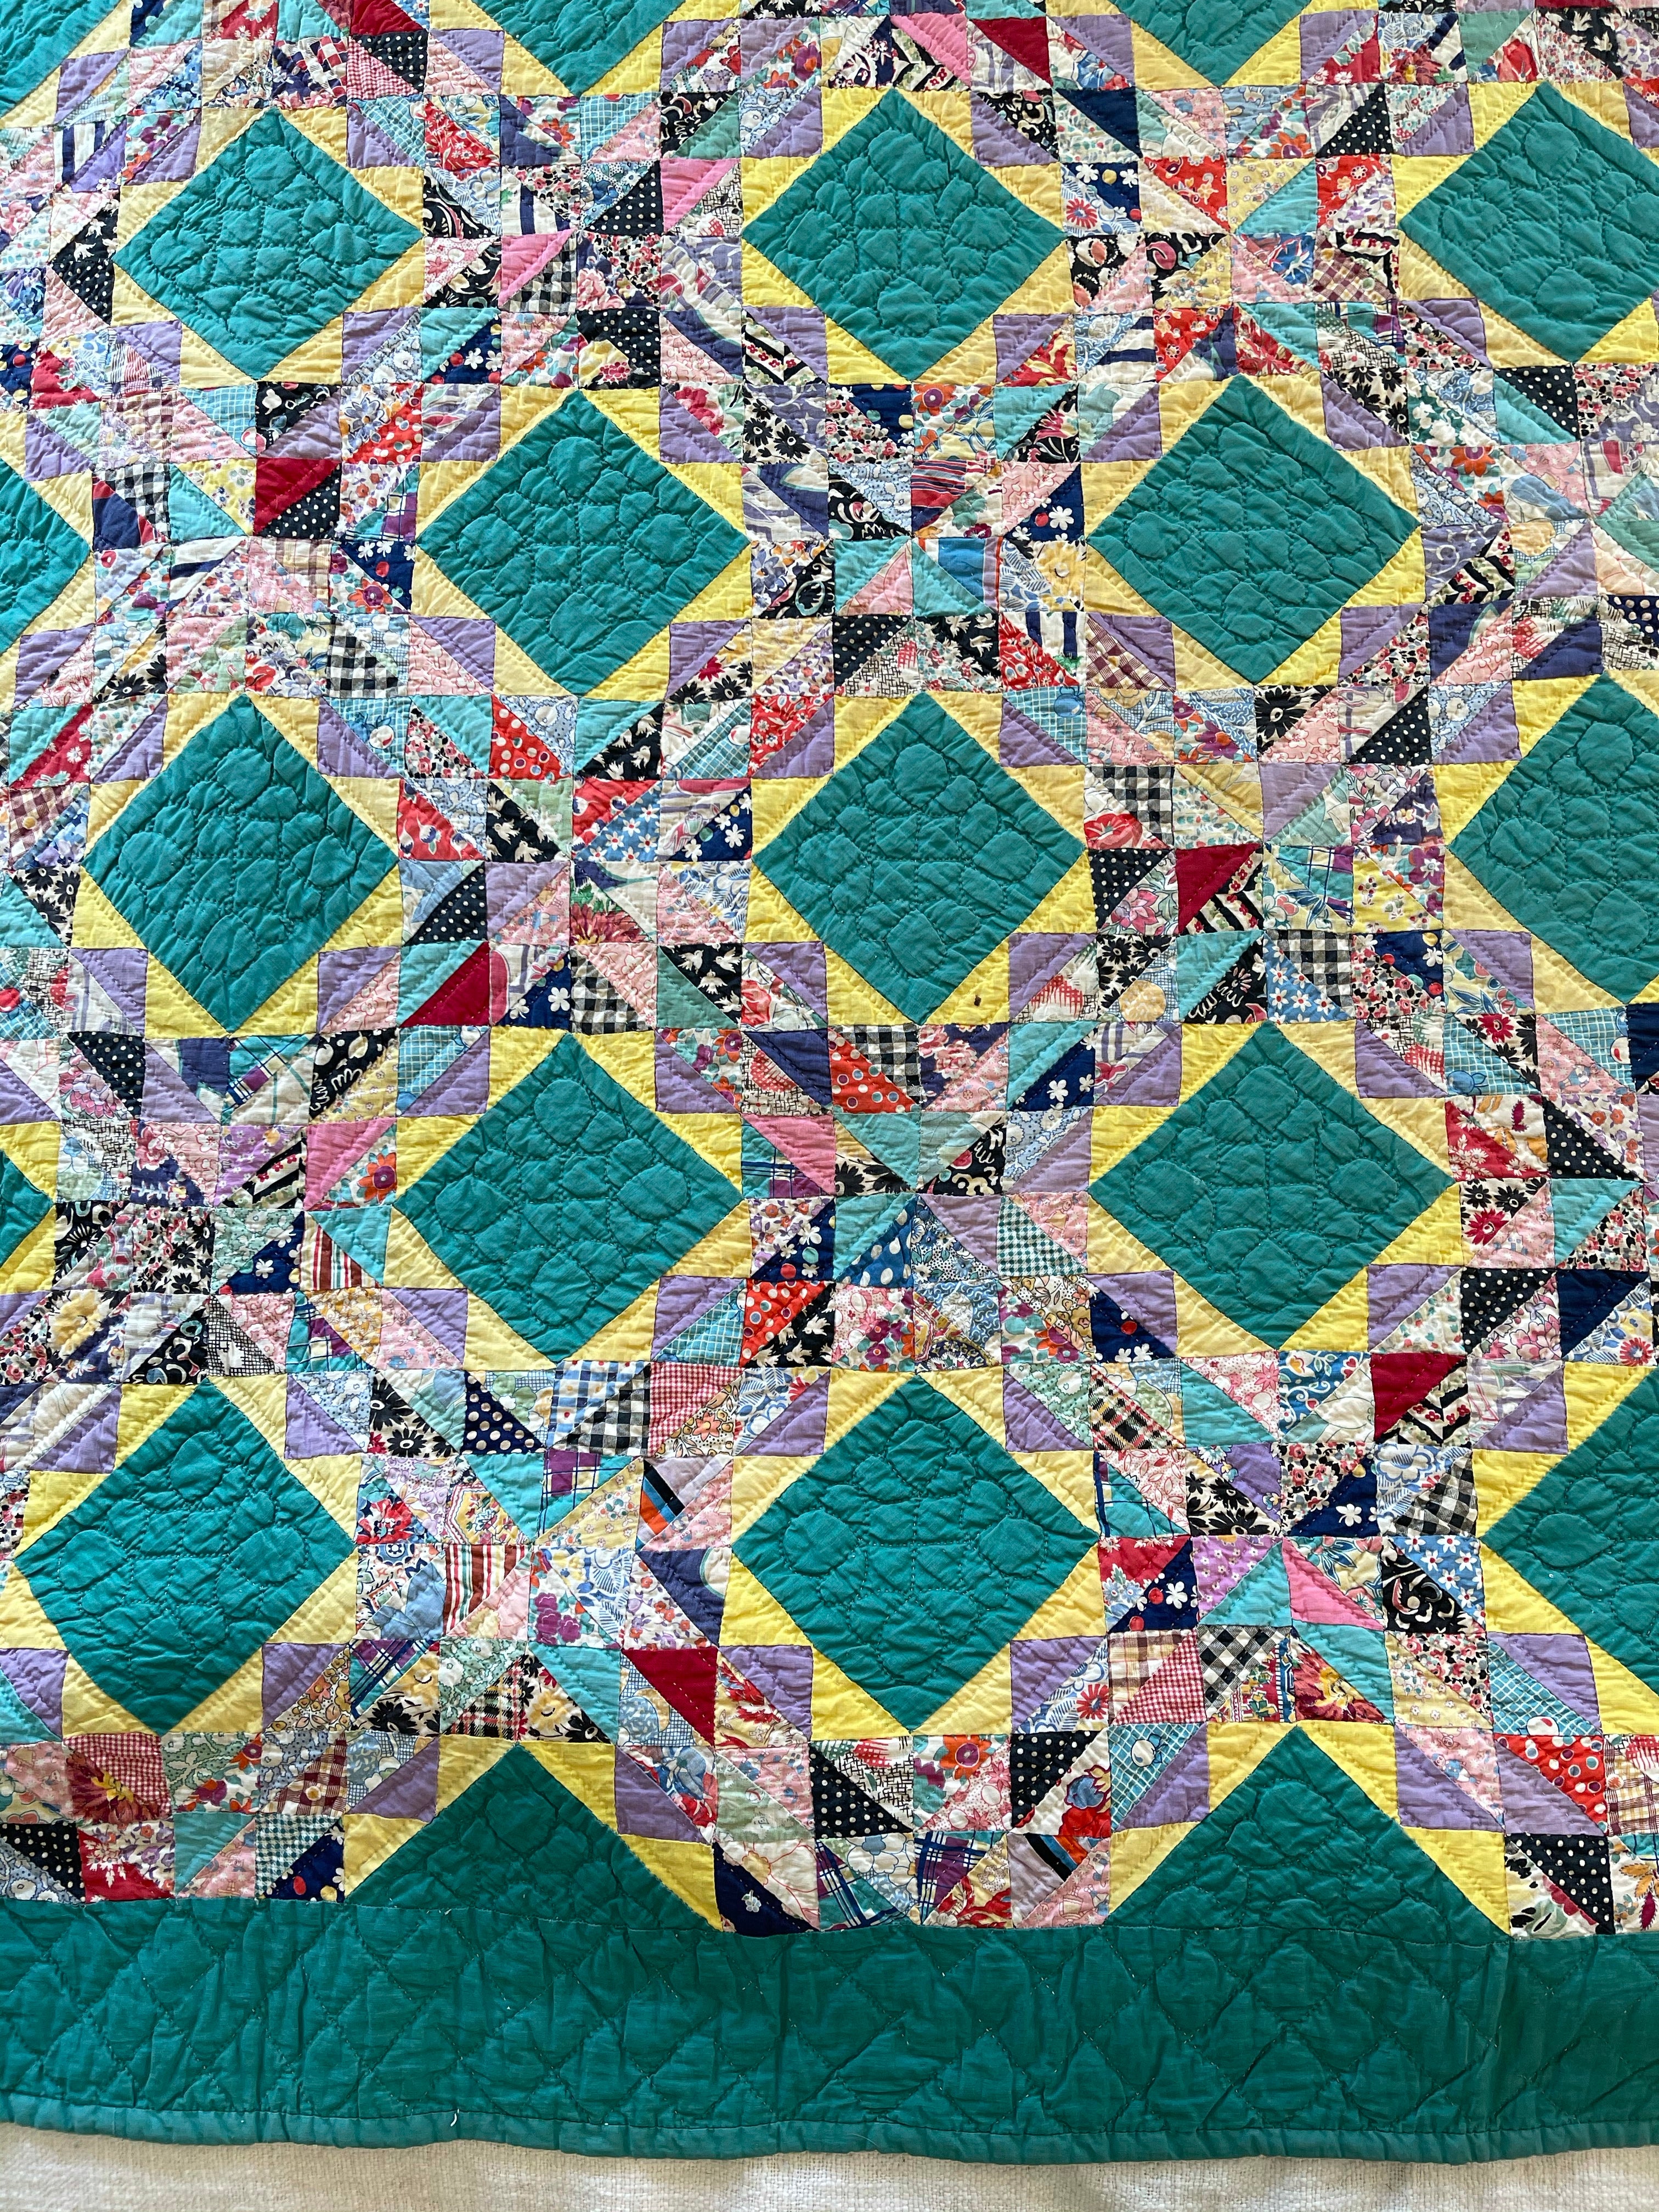 The Green Quilt